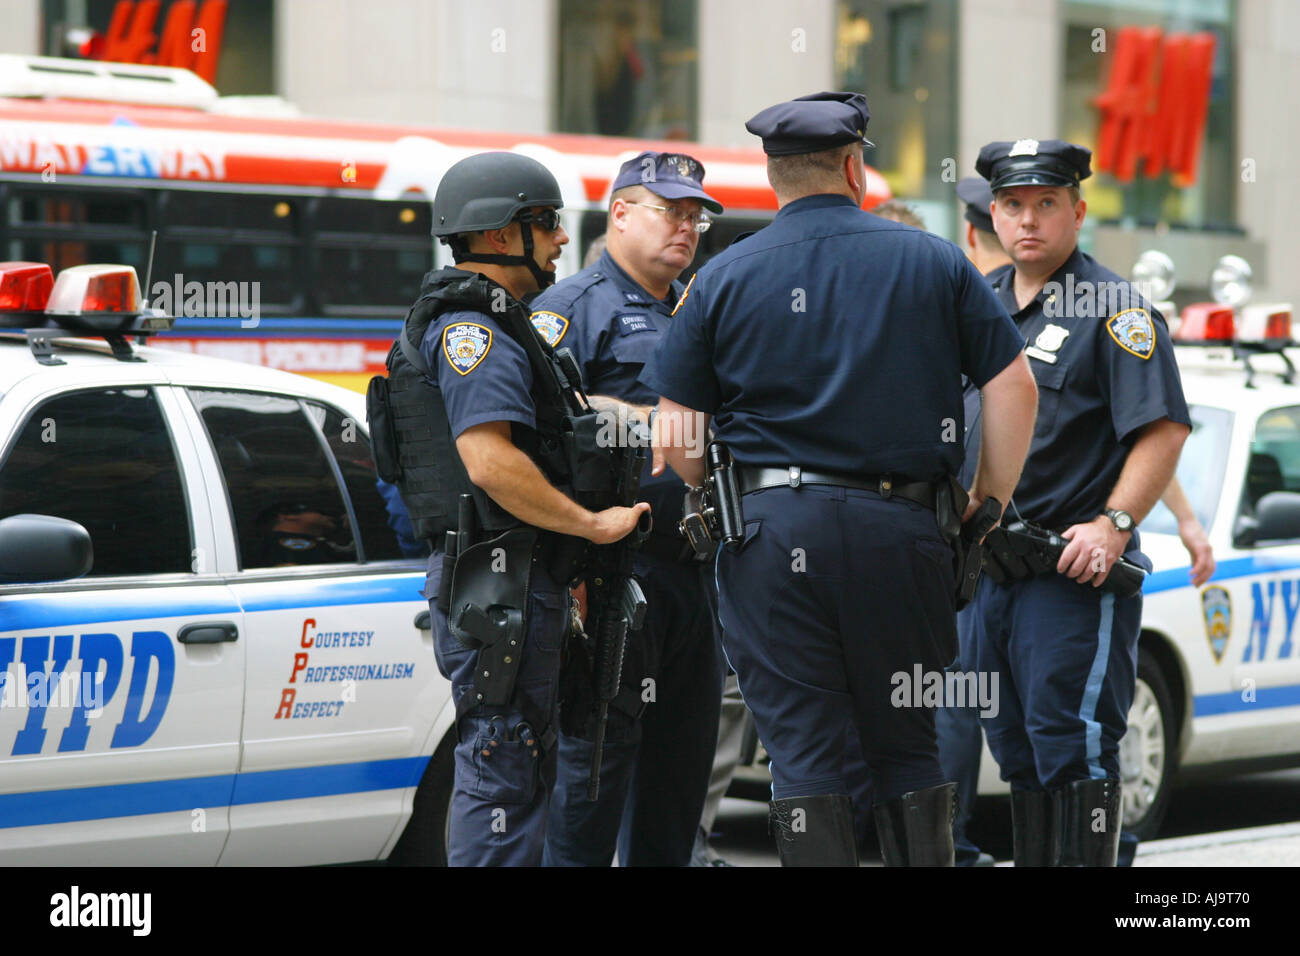 NYPD police in uniform in front of patrol car NYC Stock Photo